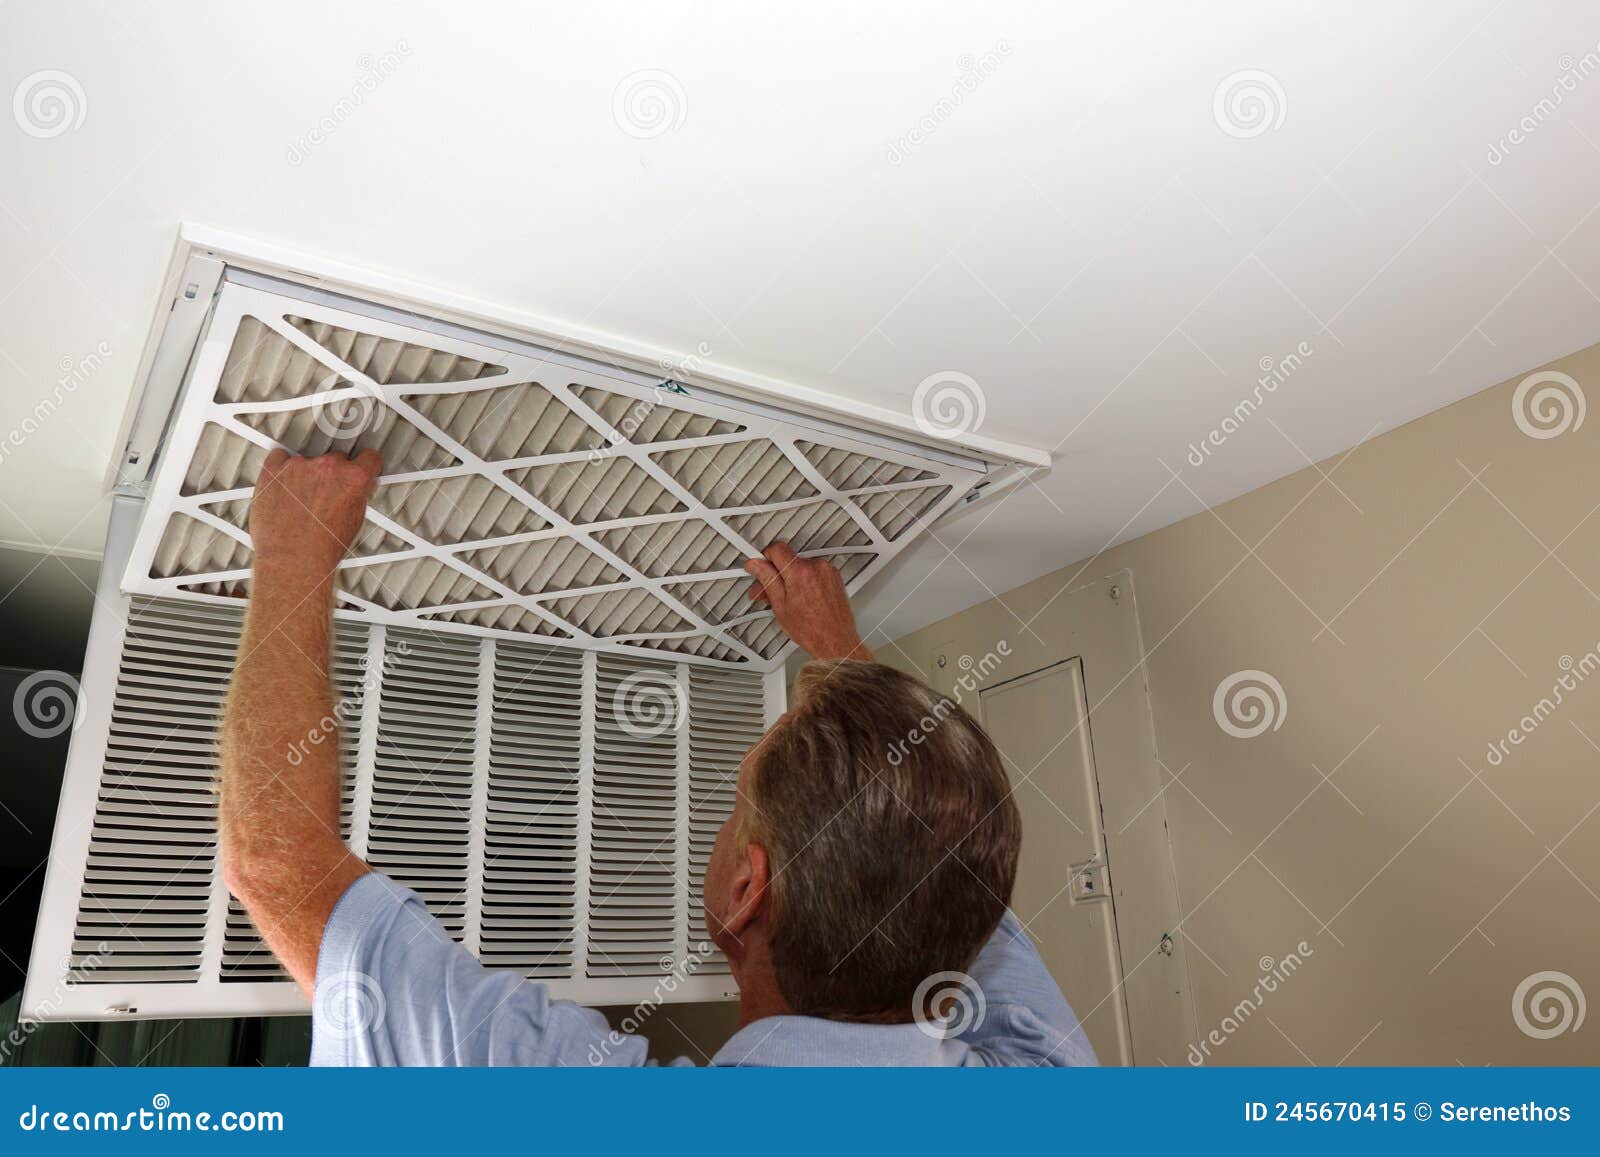 adult male removing air filter from a home furnace ceiling vent